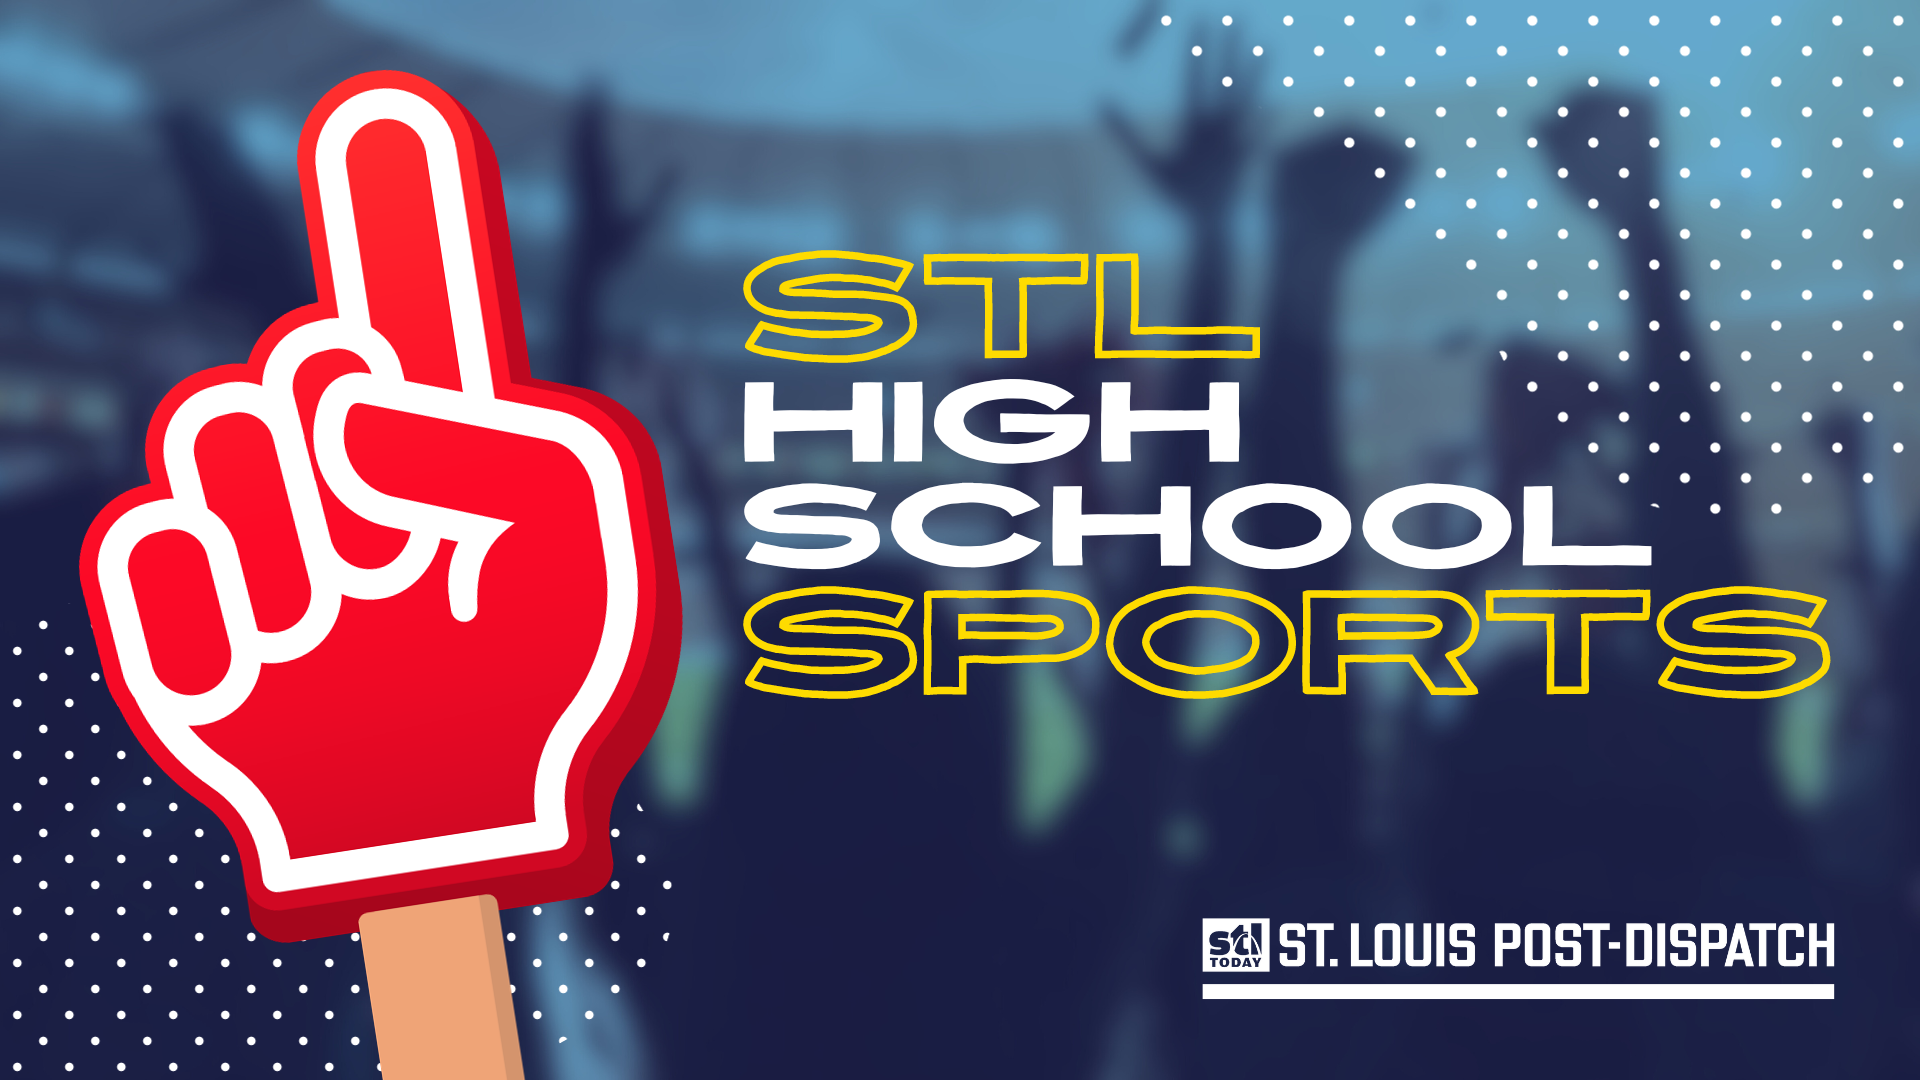 Unwrapping some Christmas presents of Holiday Tournaments: STL High School Sports